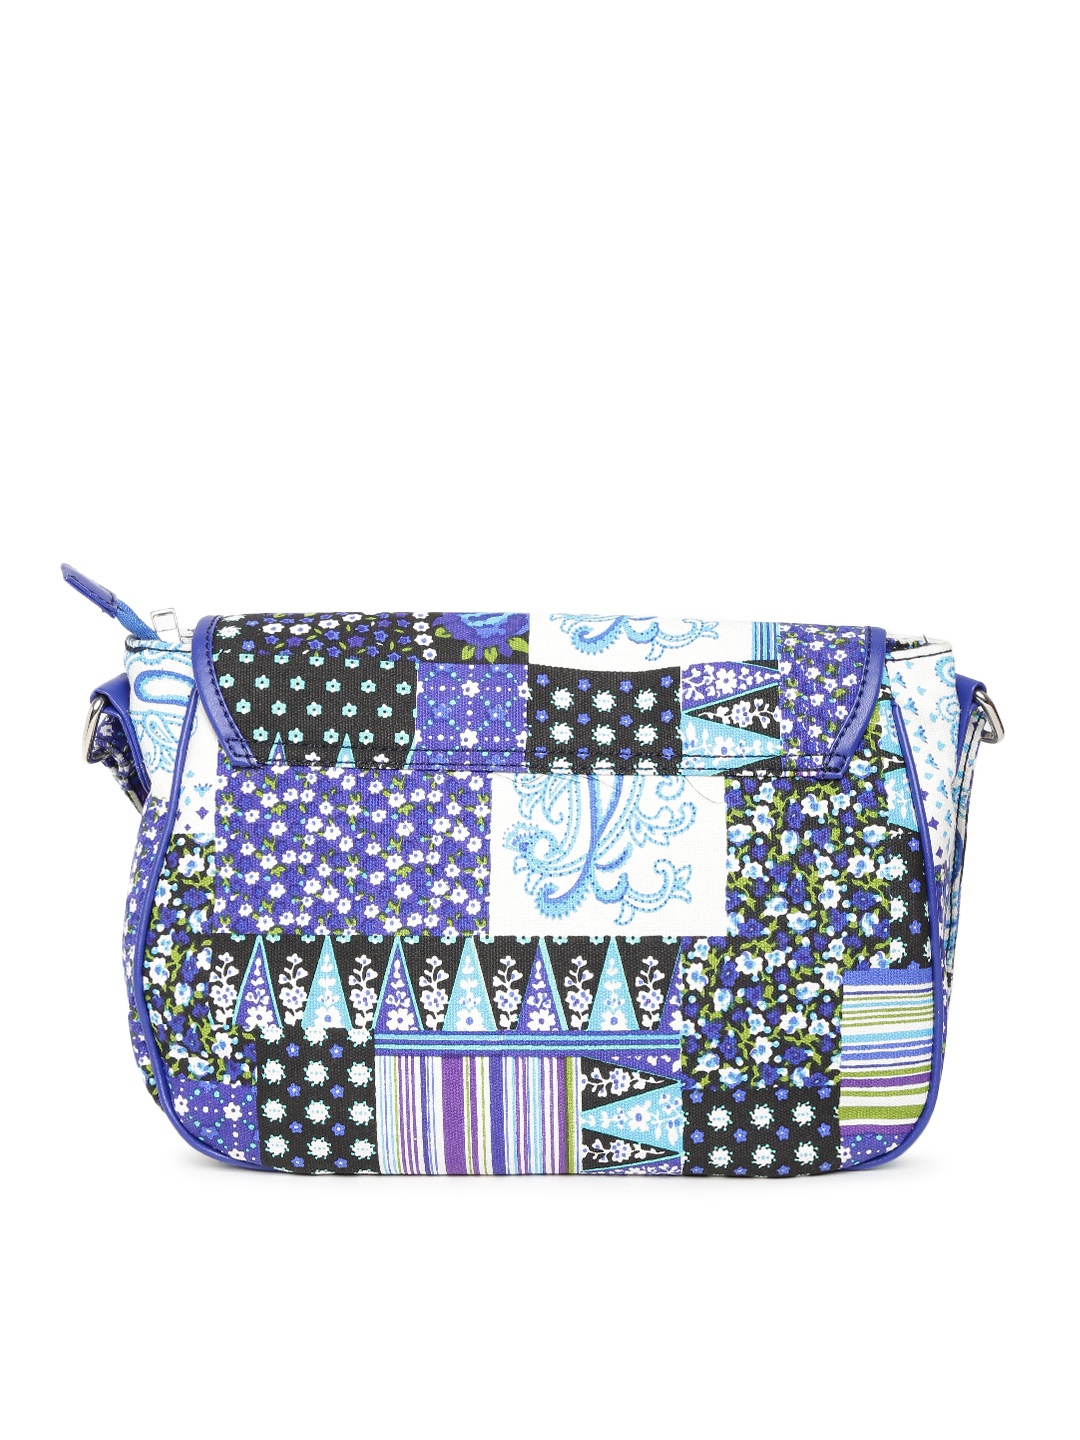 Myntra Bata Blue Printed Sling Bag 818352 | Buy Myntra at best price online. All myntra products ...